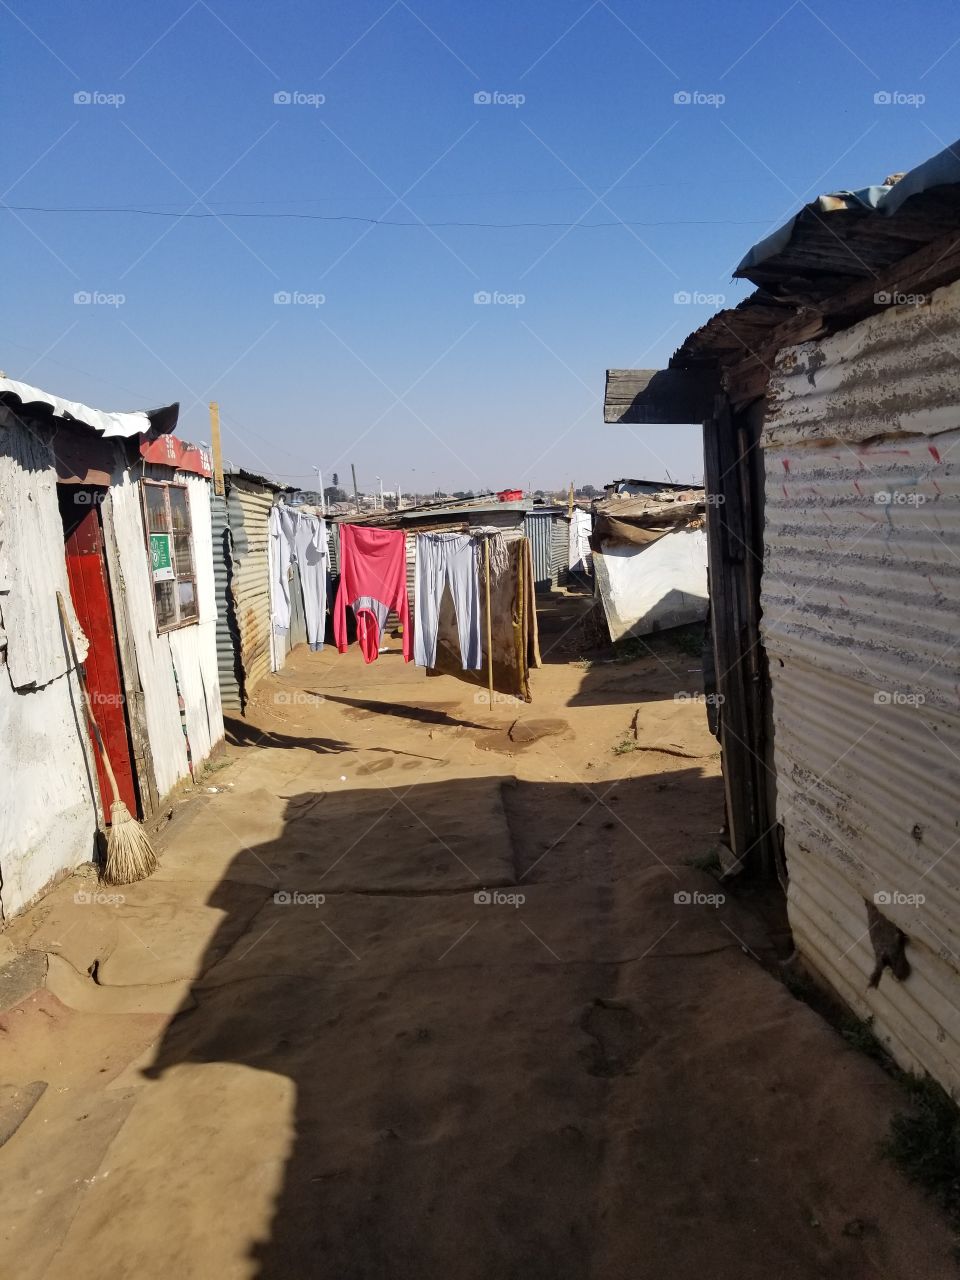 South African slums